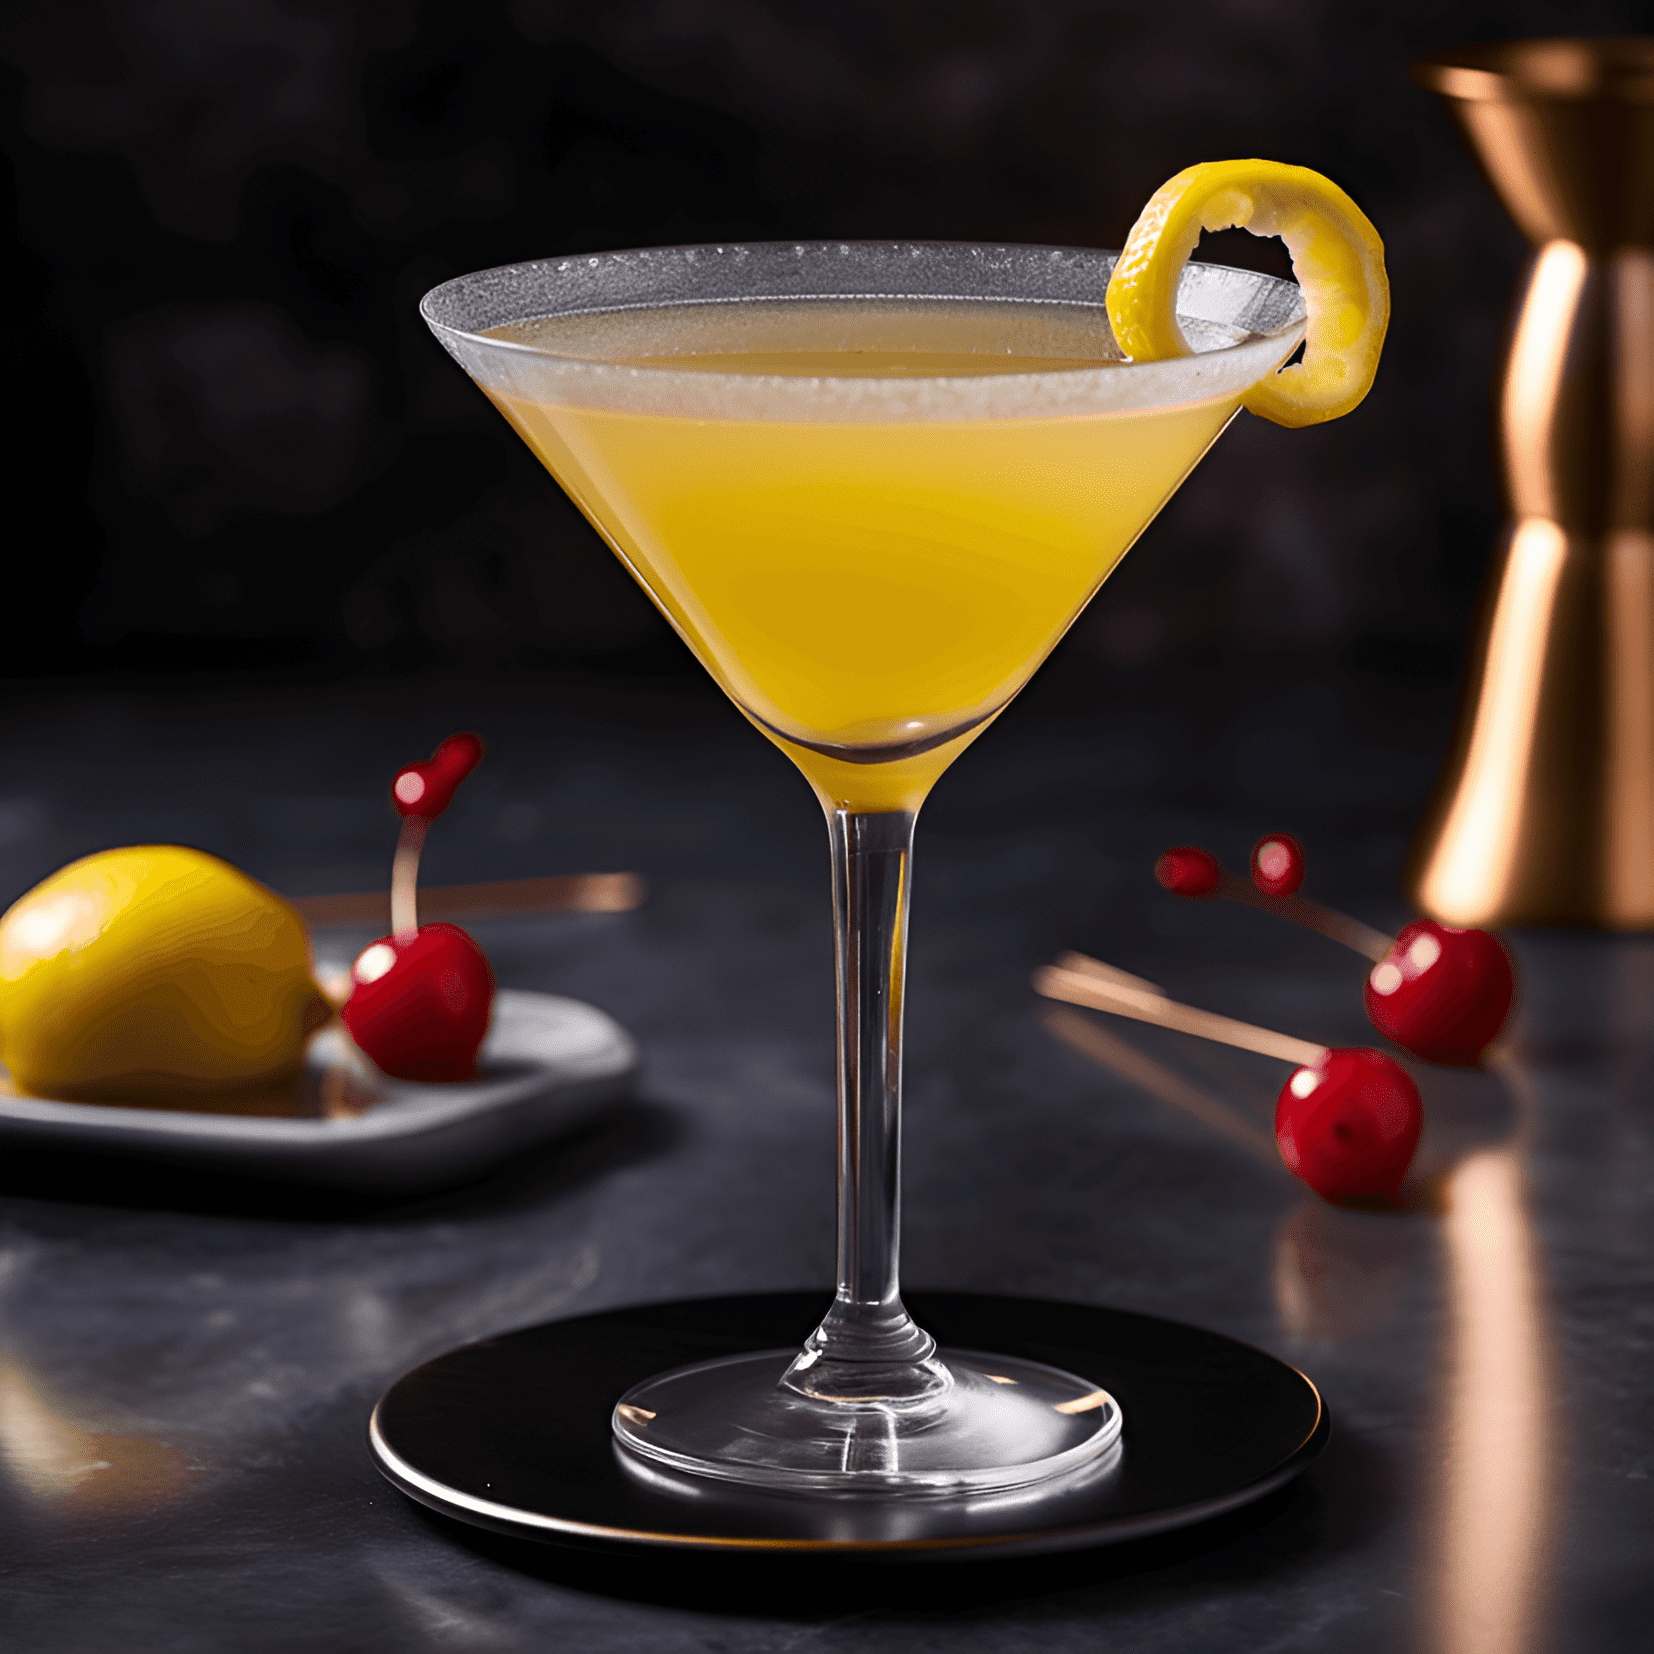 Golden Gate Cocktail Recipe - The Golden Gate cocktail is a well-balanced mix of sweet, sour, and slightly bitter flavors. The combination of citrus and herbal notes creates a refreshing and invigorating taste that is perfect for sipping on a warm day.